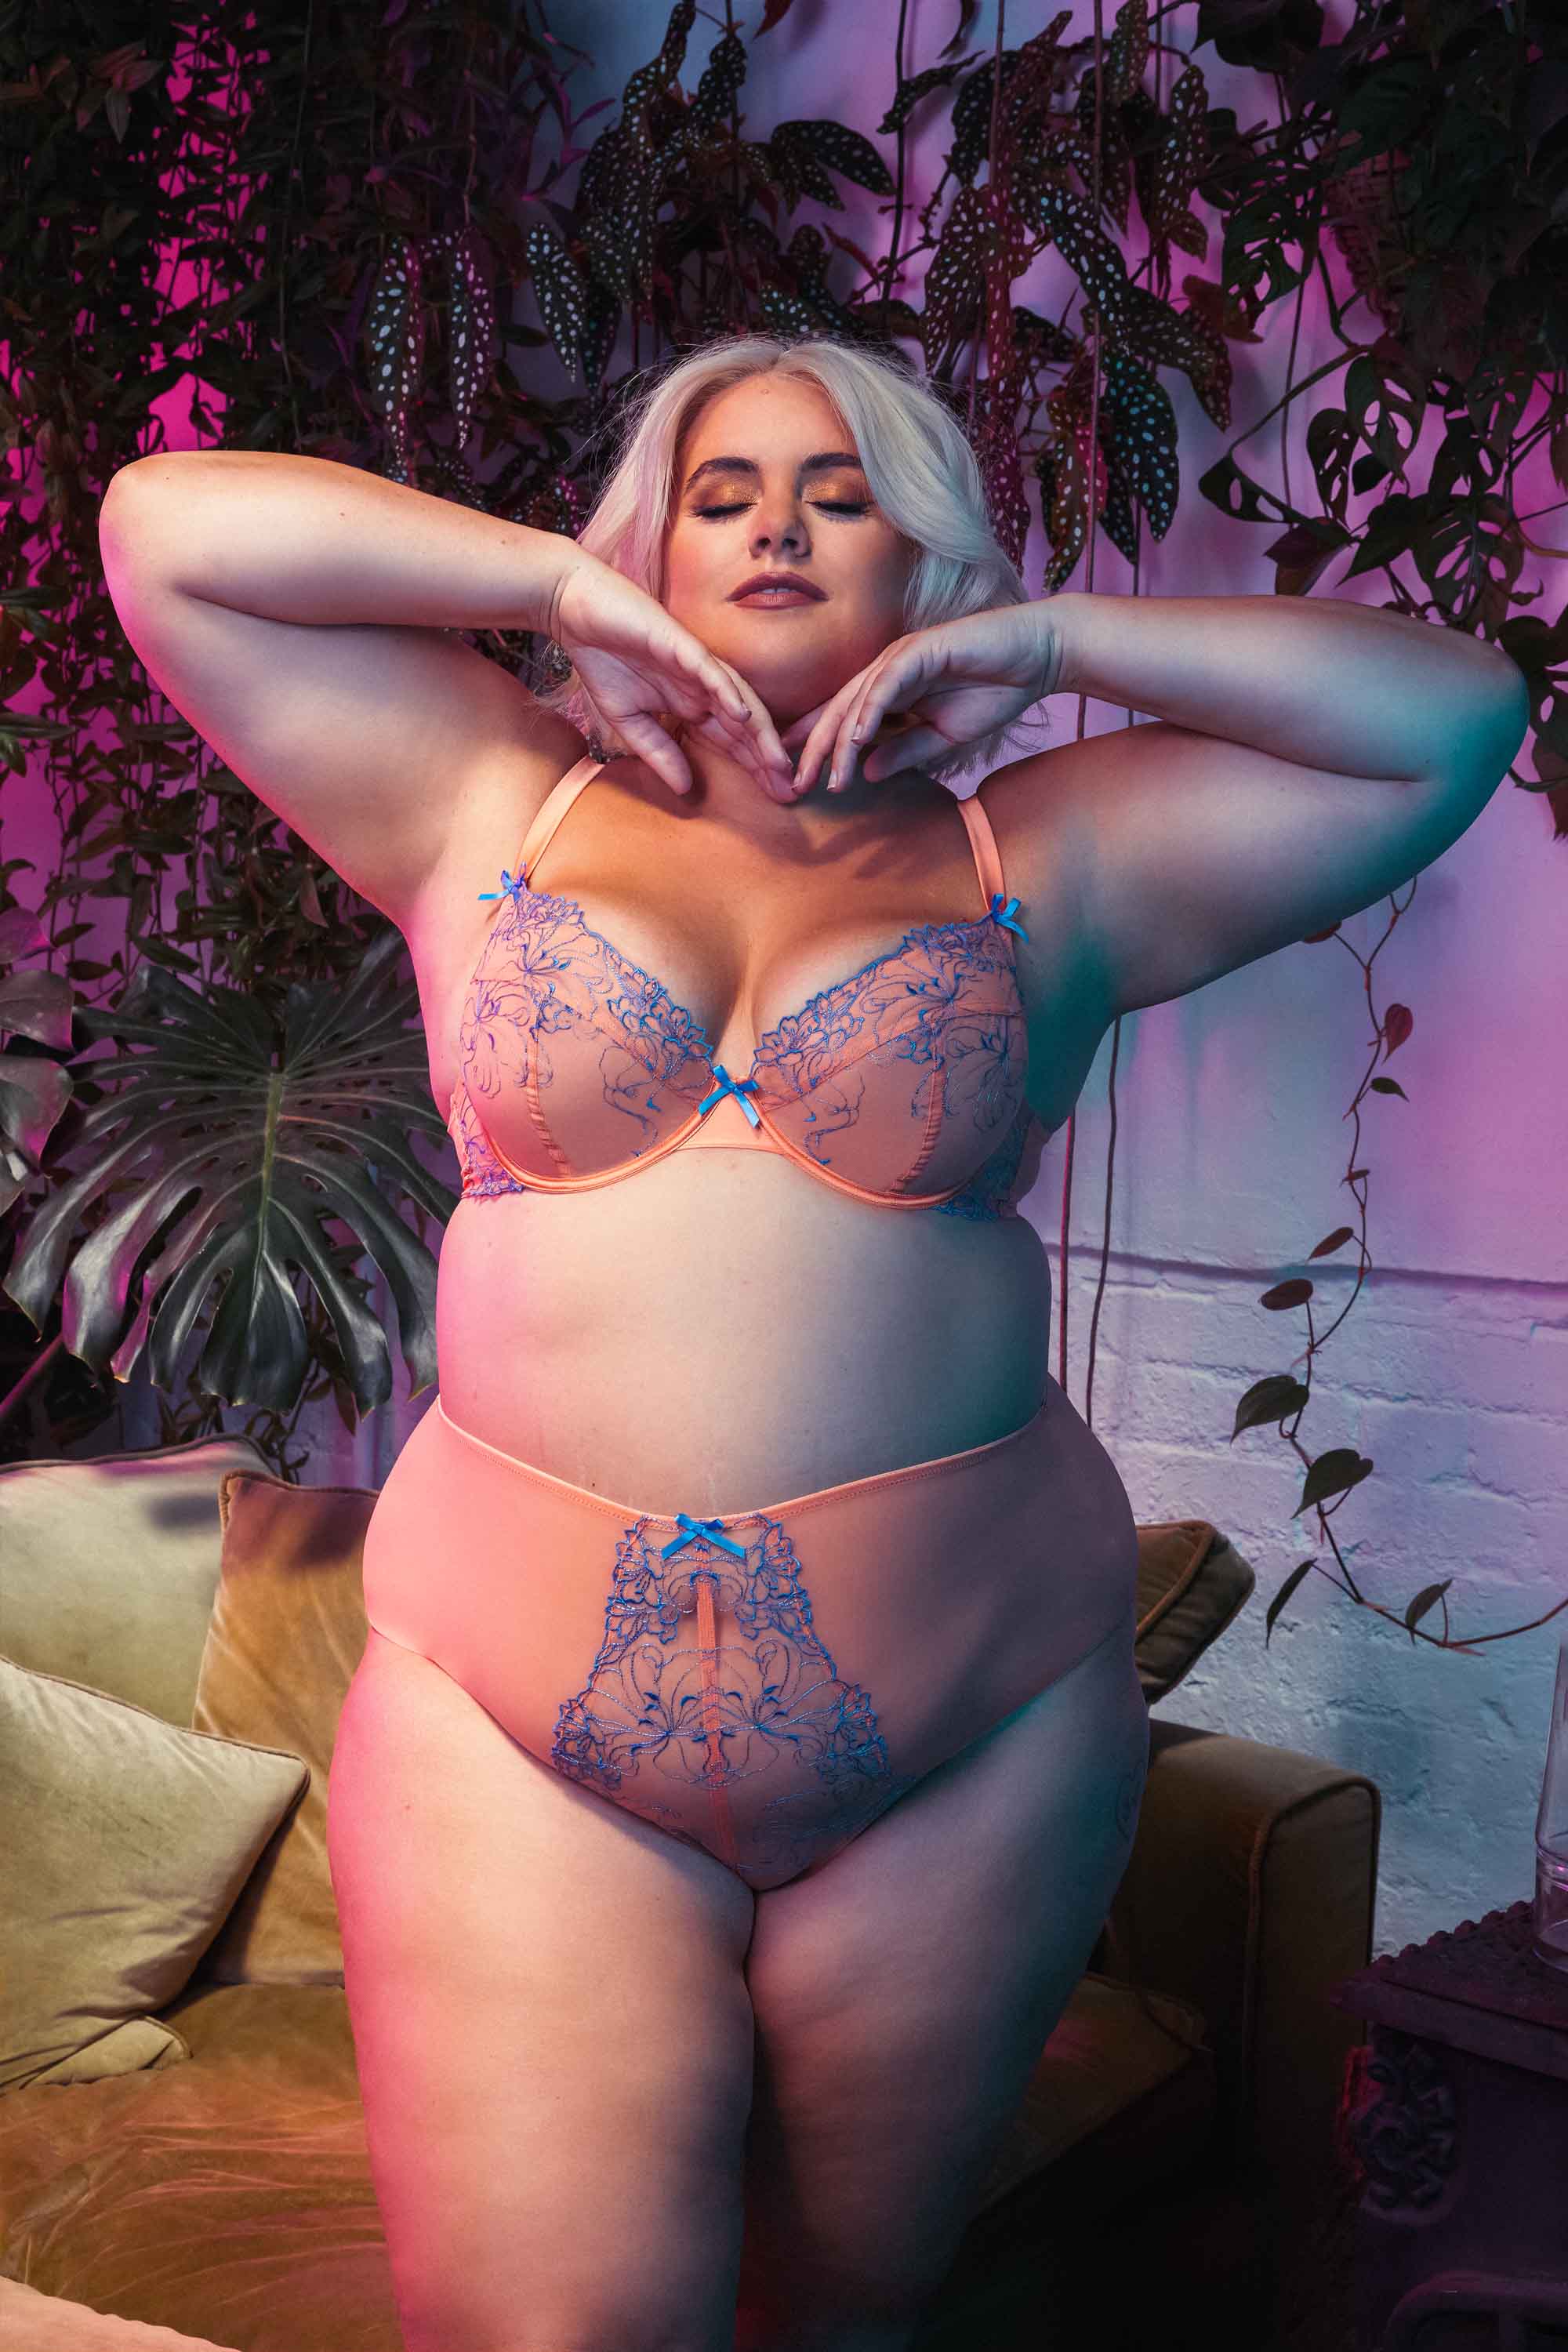 Mesh and lace orange bra and brief set with lilac/blue lace accents and bows, seen on Felicity Hayward.